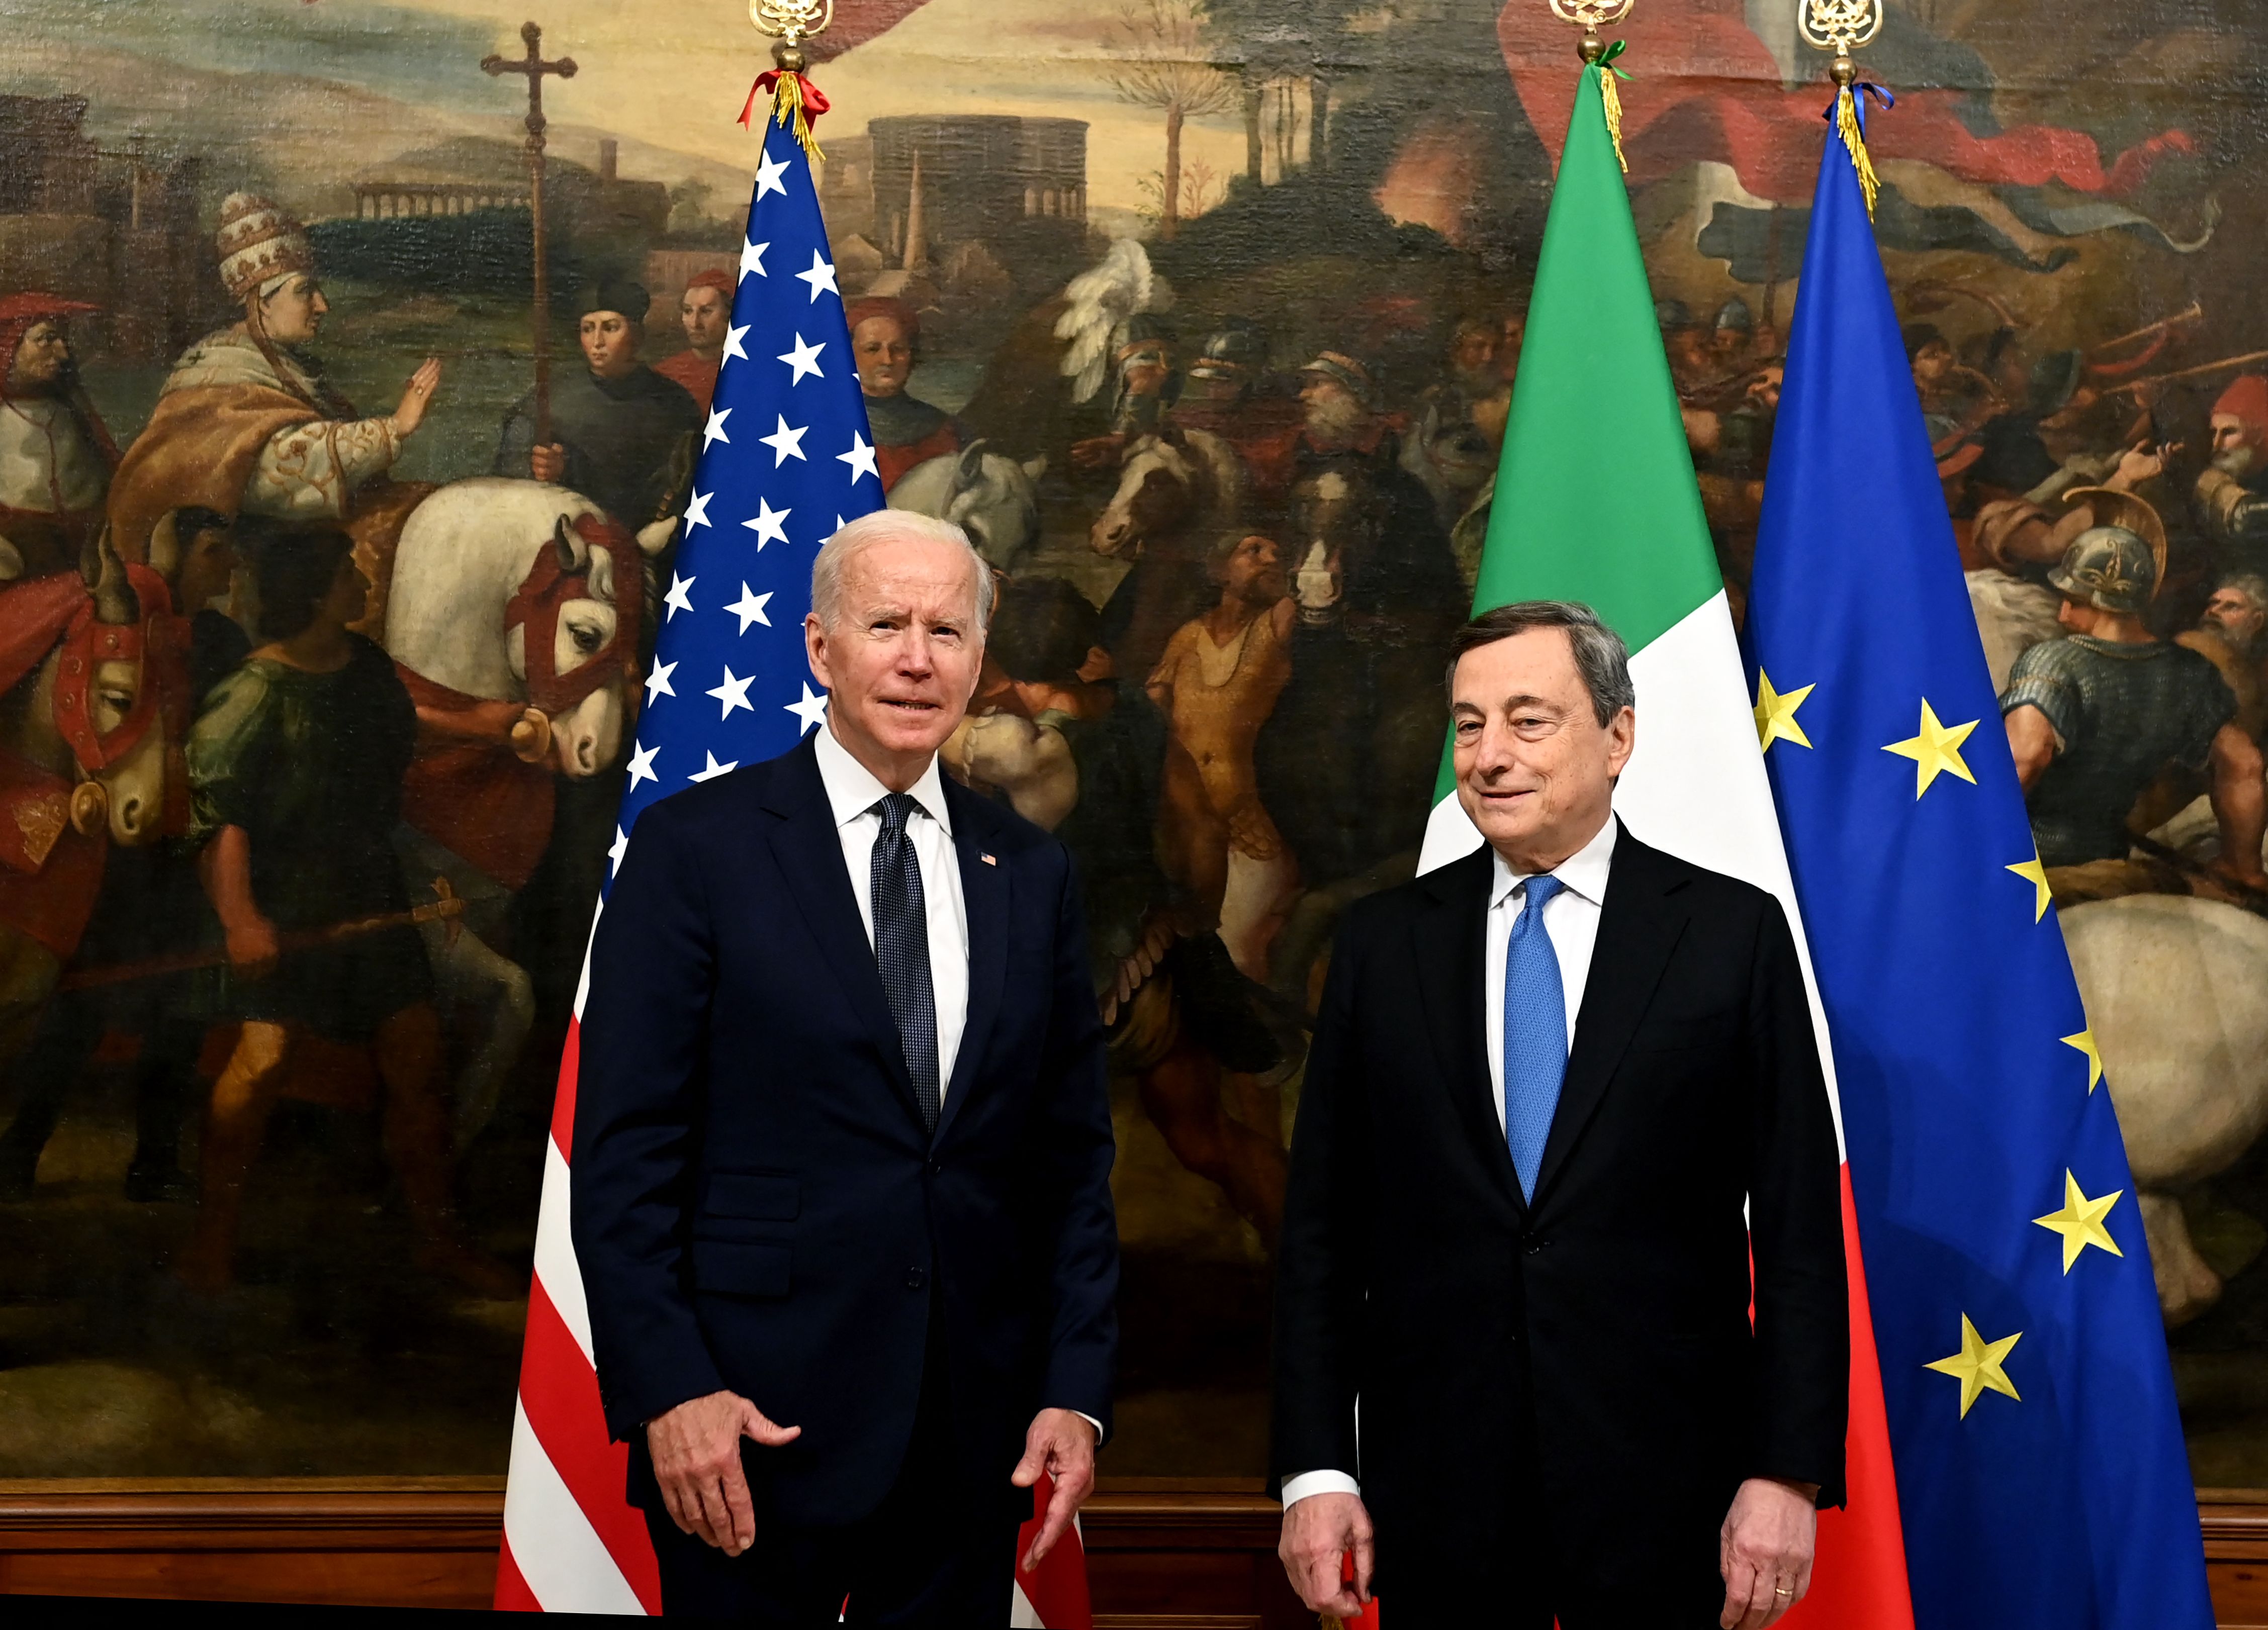 On Friday, ahead of the G20 summit, President Joe Biden met Italy's Prime Minister Mario Draghi at the Chigi palace in Rome.